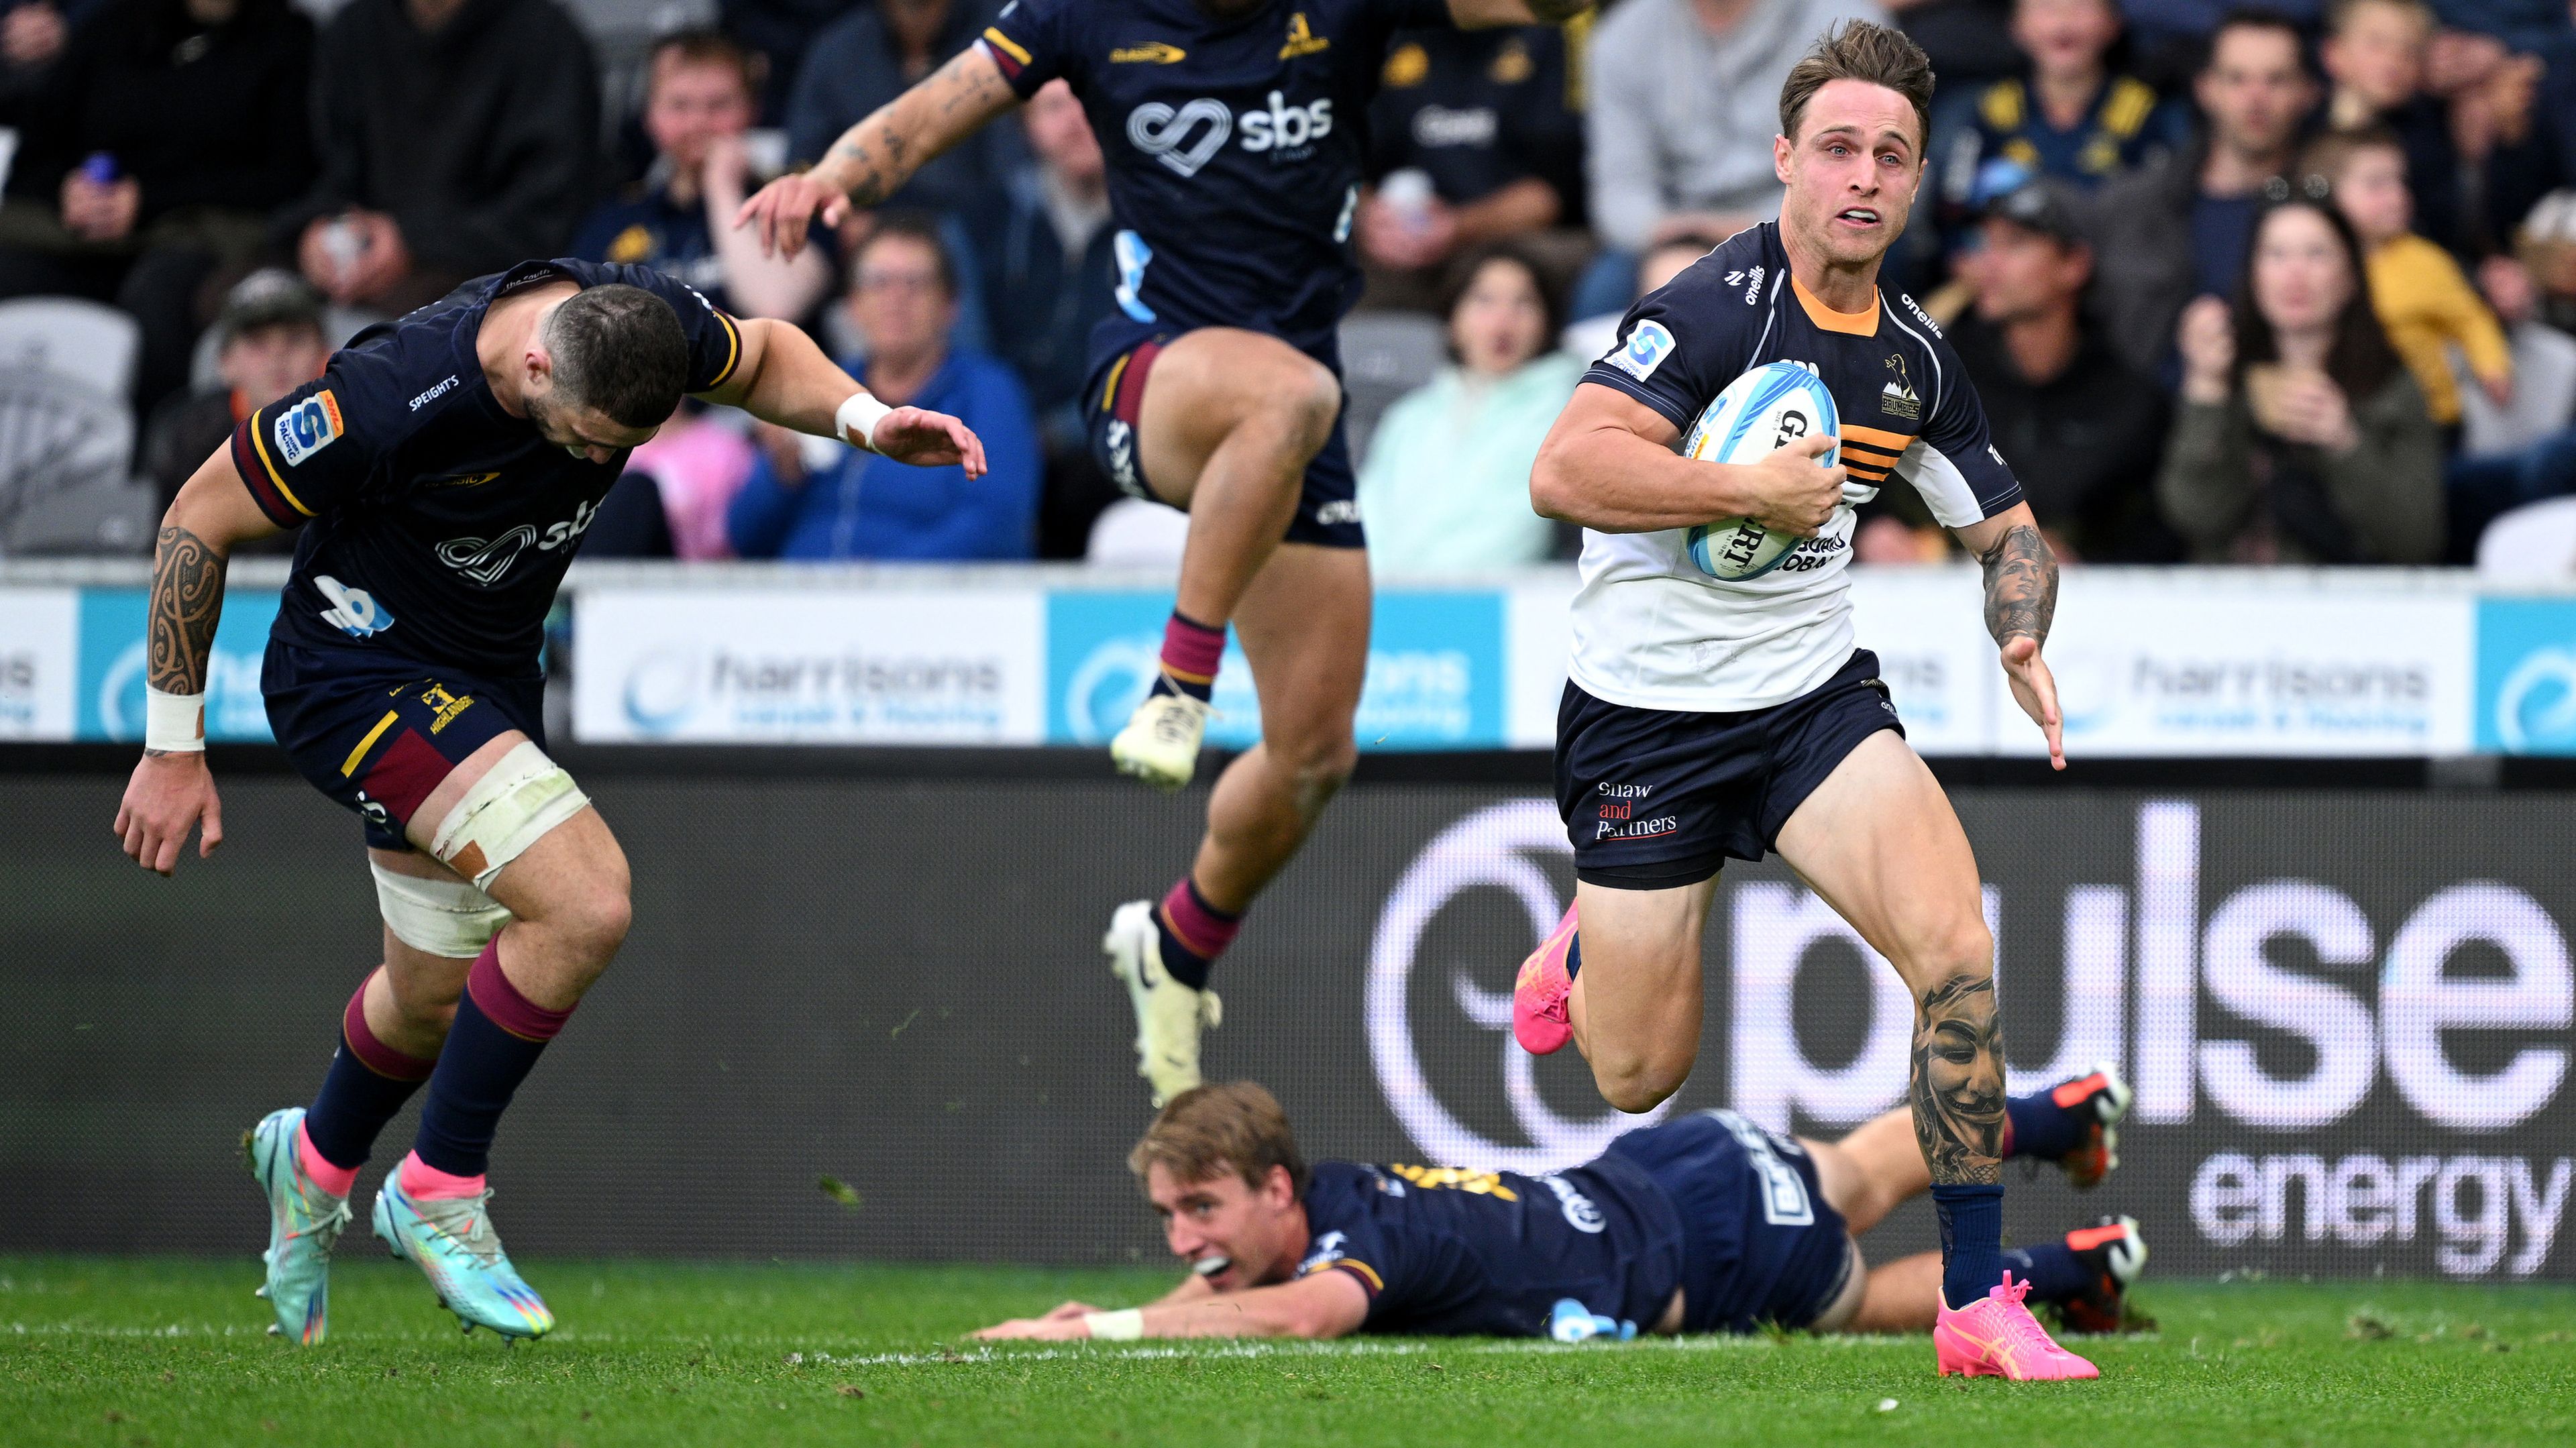 Corey Toole of the Brumbies charges towards the try line to score.